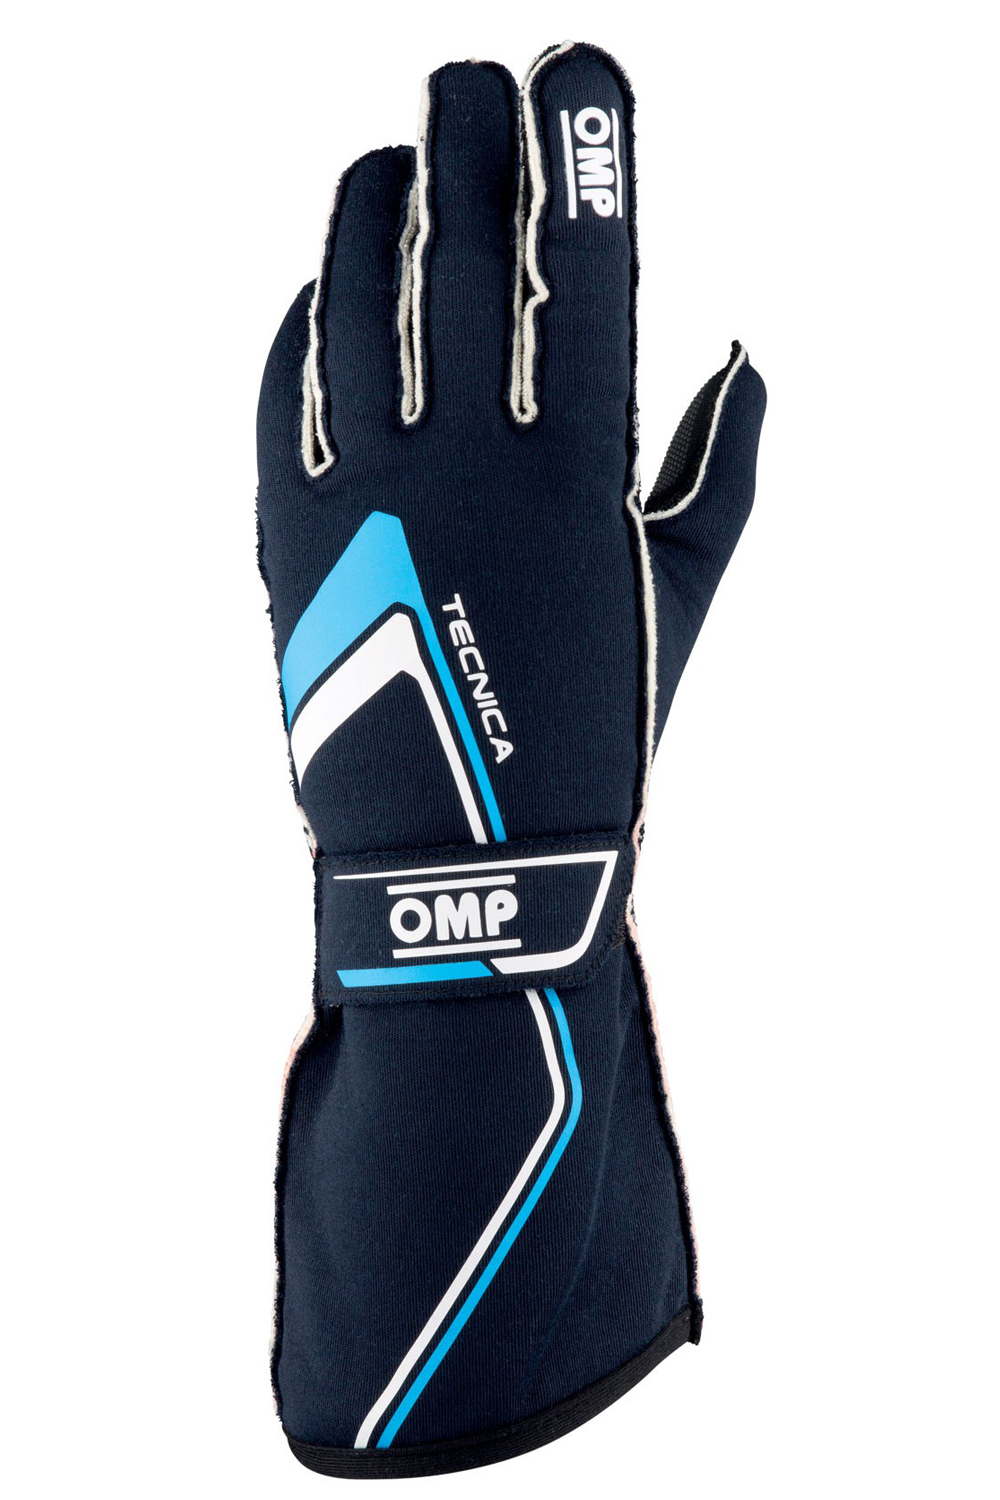 OMP Racing IB772BCM - Gloves, Tecnica, Driving, FIA Approved, Double Layer, Fire Retardant Fabric, Blue / Cyan, Medium, Pair